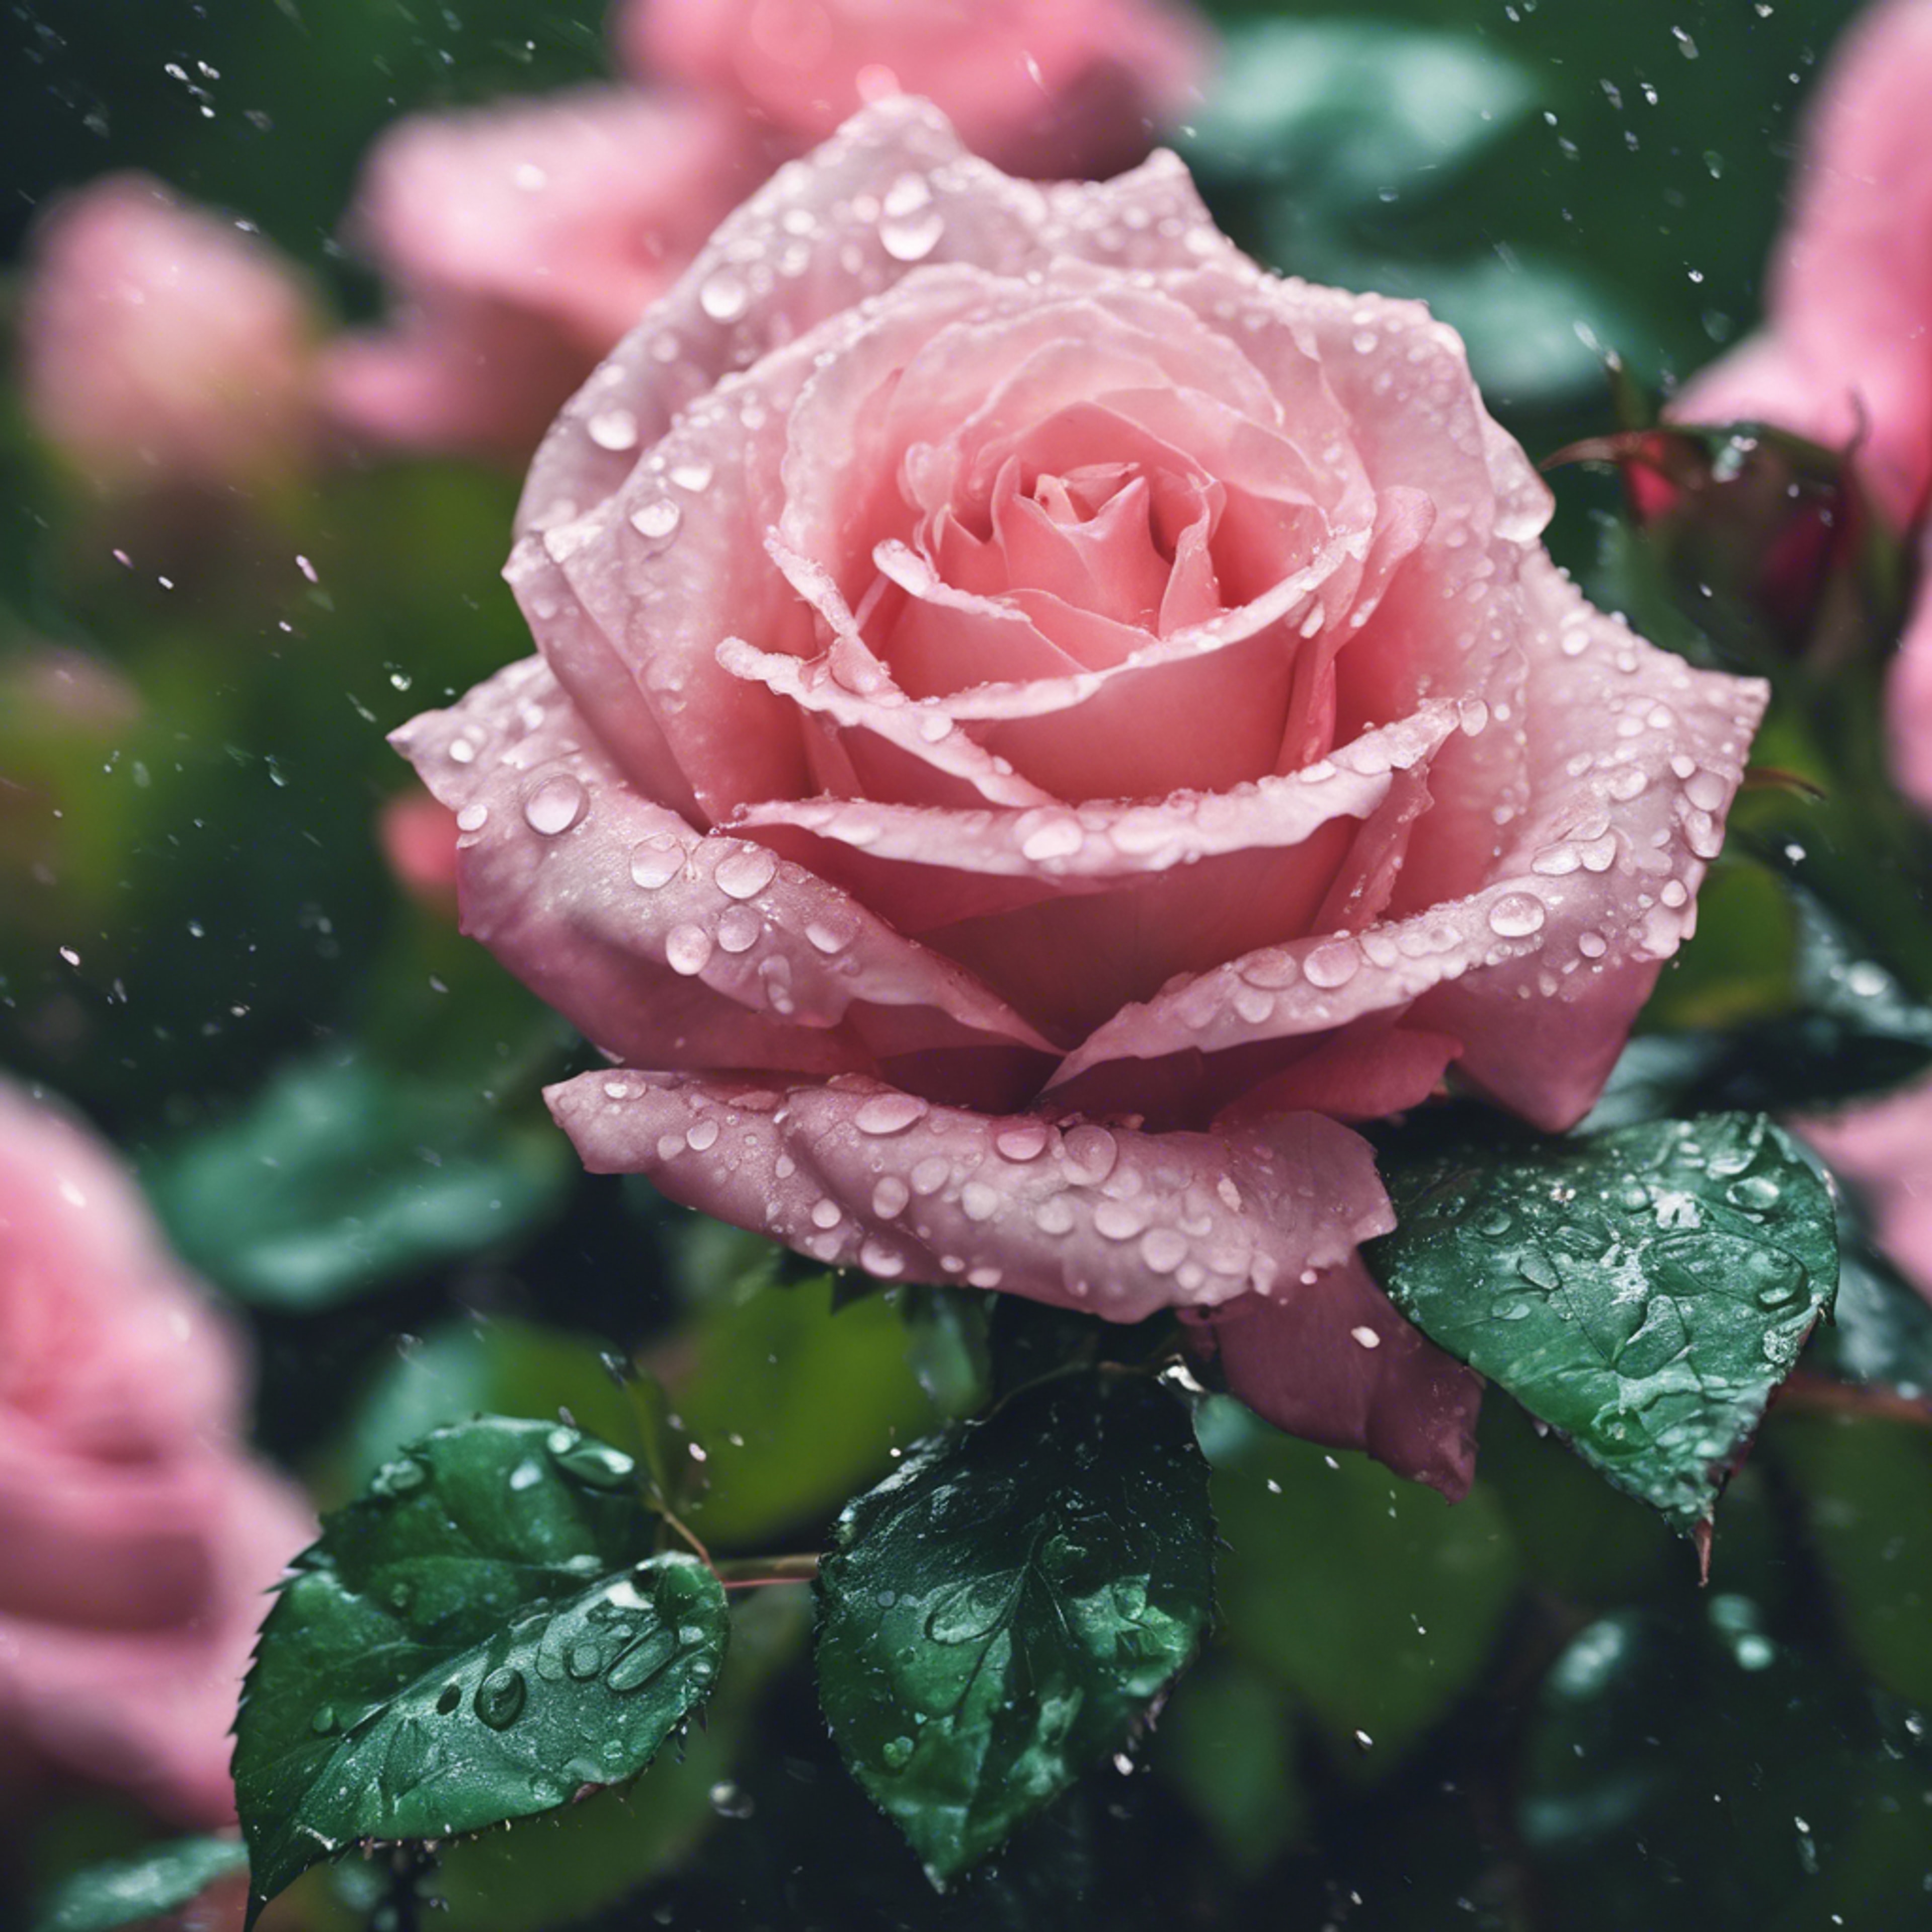 Gentle rain falling on the bright green leaves and pink roses. Tapeta[2479f95970de45b492b9]